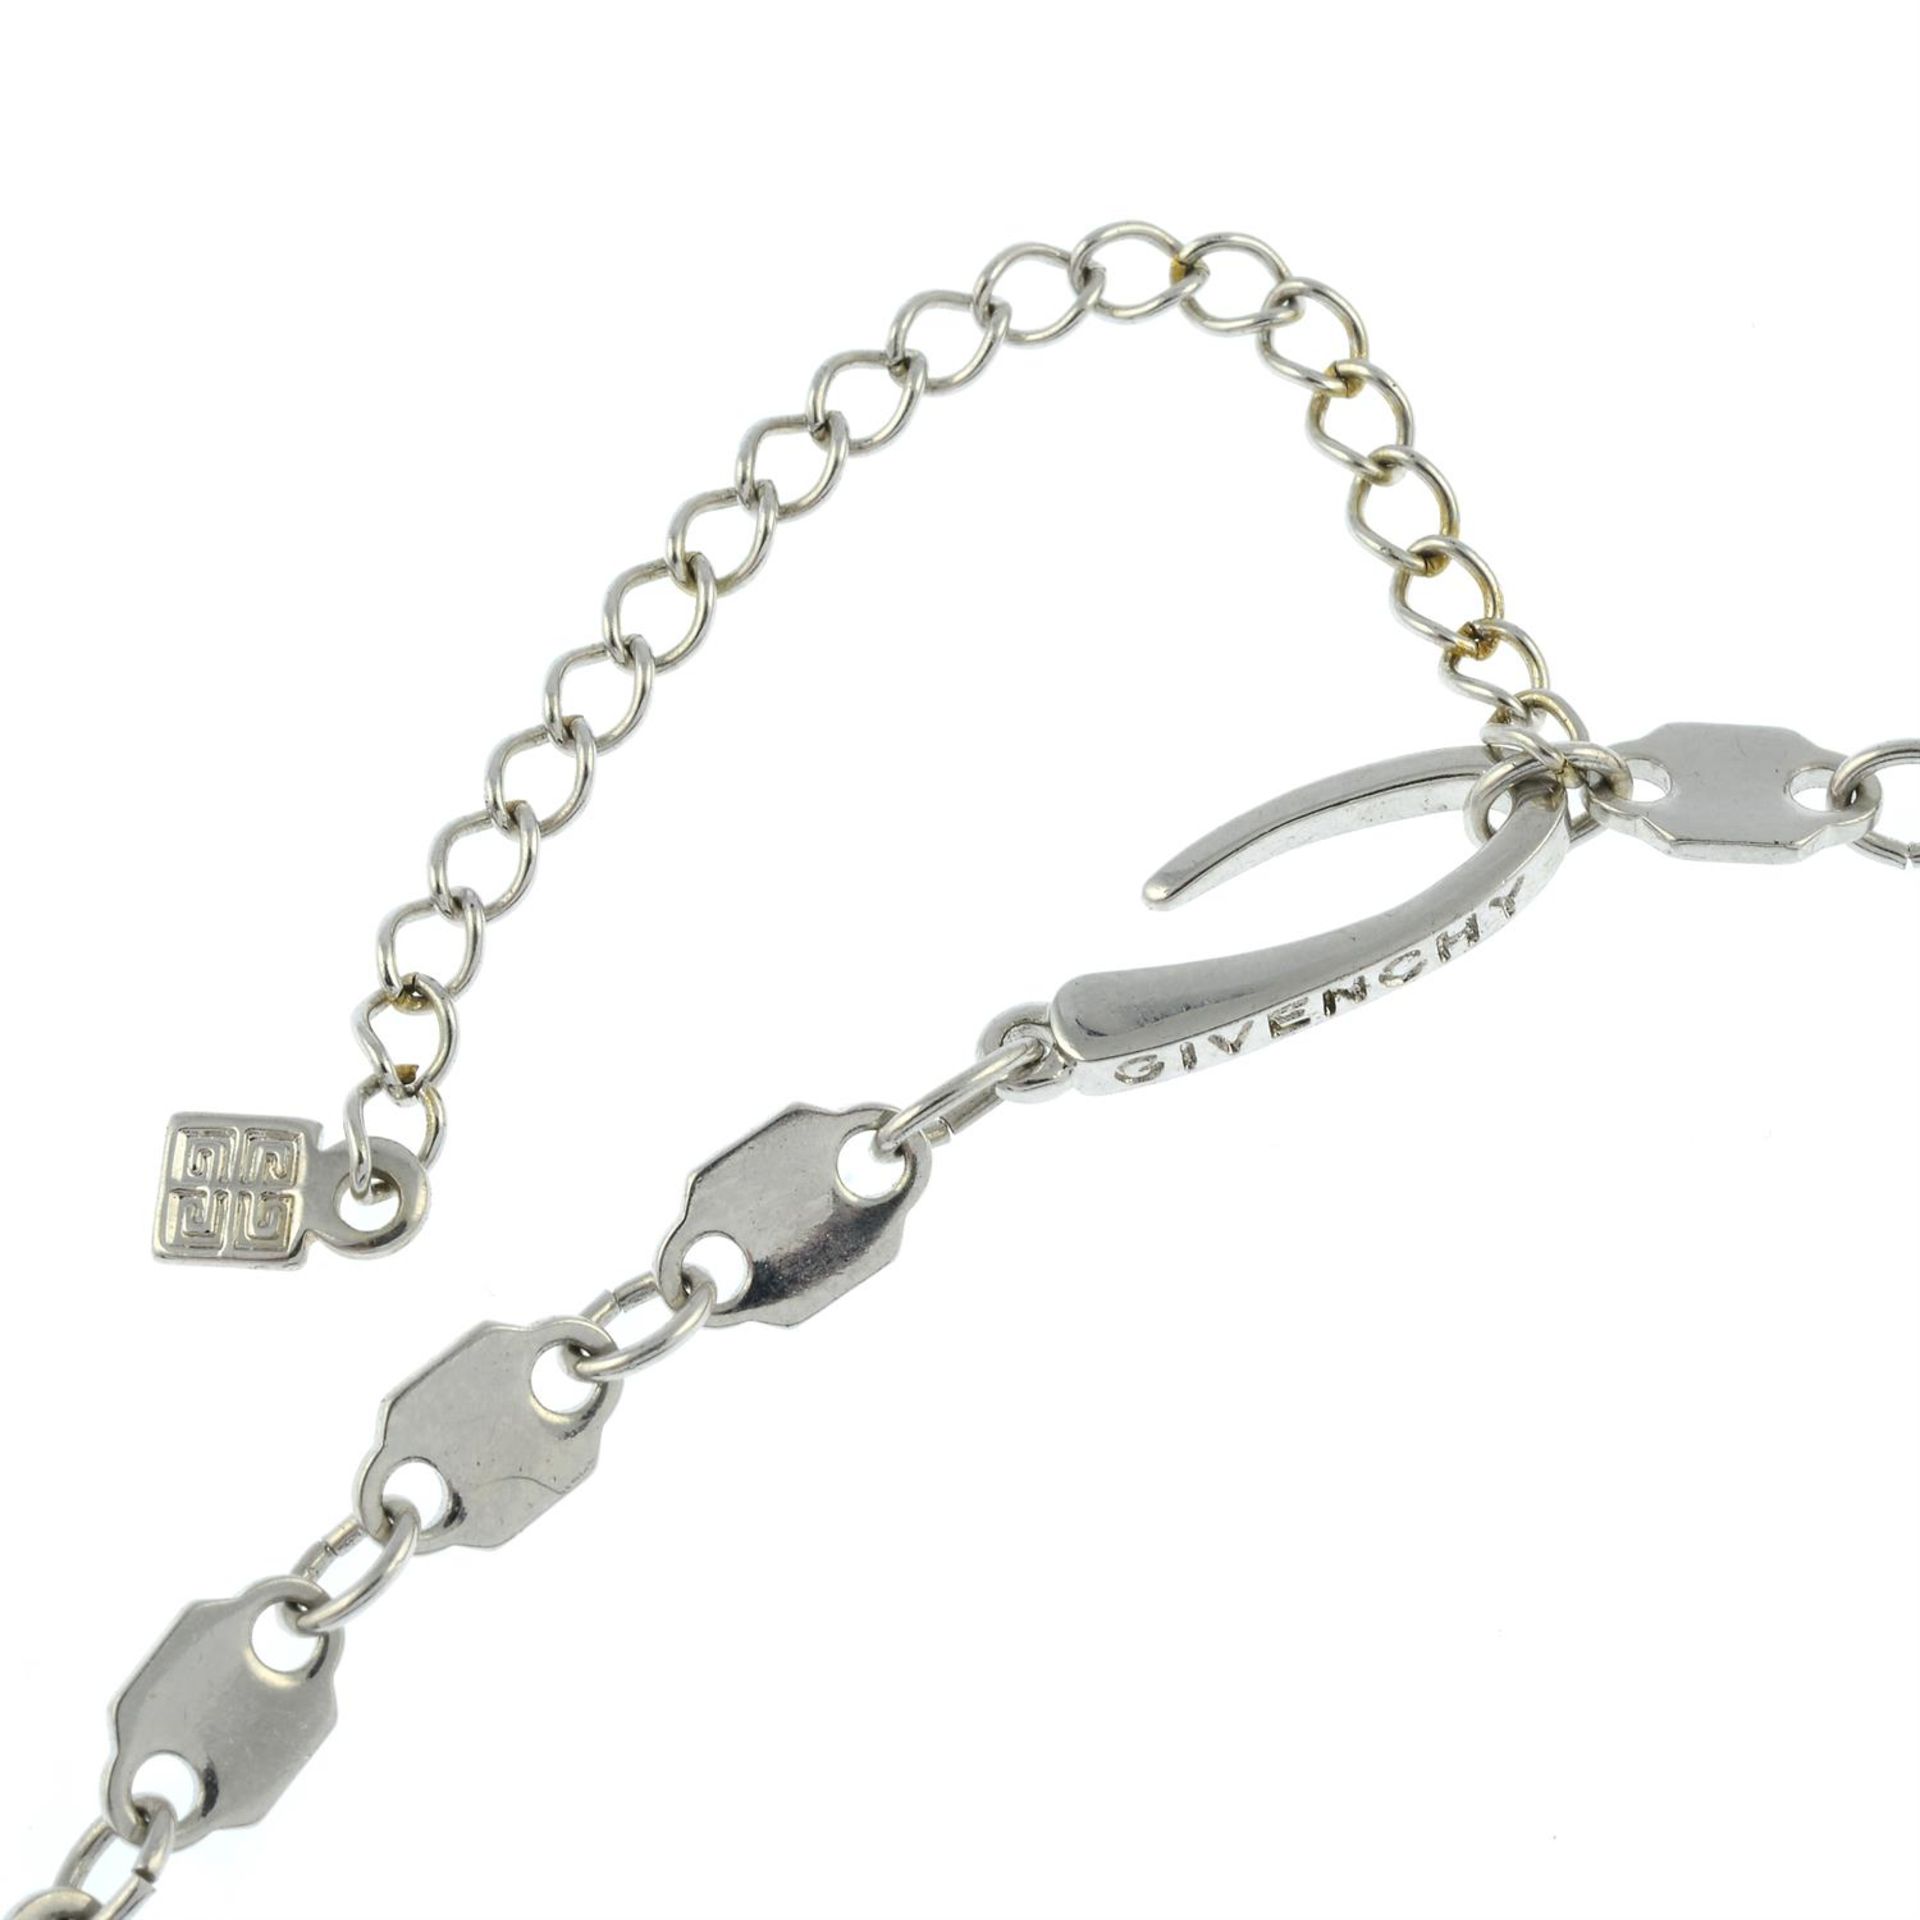 GIVENCHY - a silver-tone chain. - Image 2 of 3